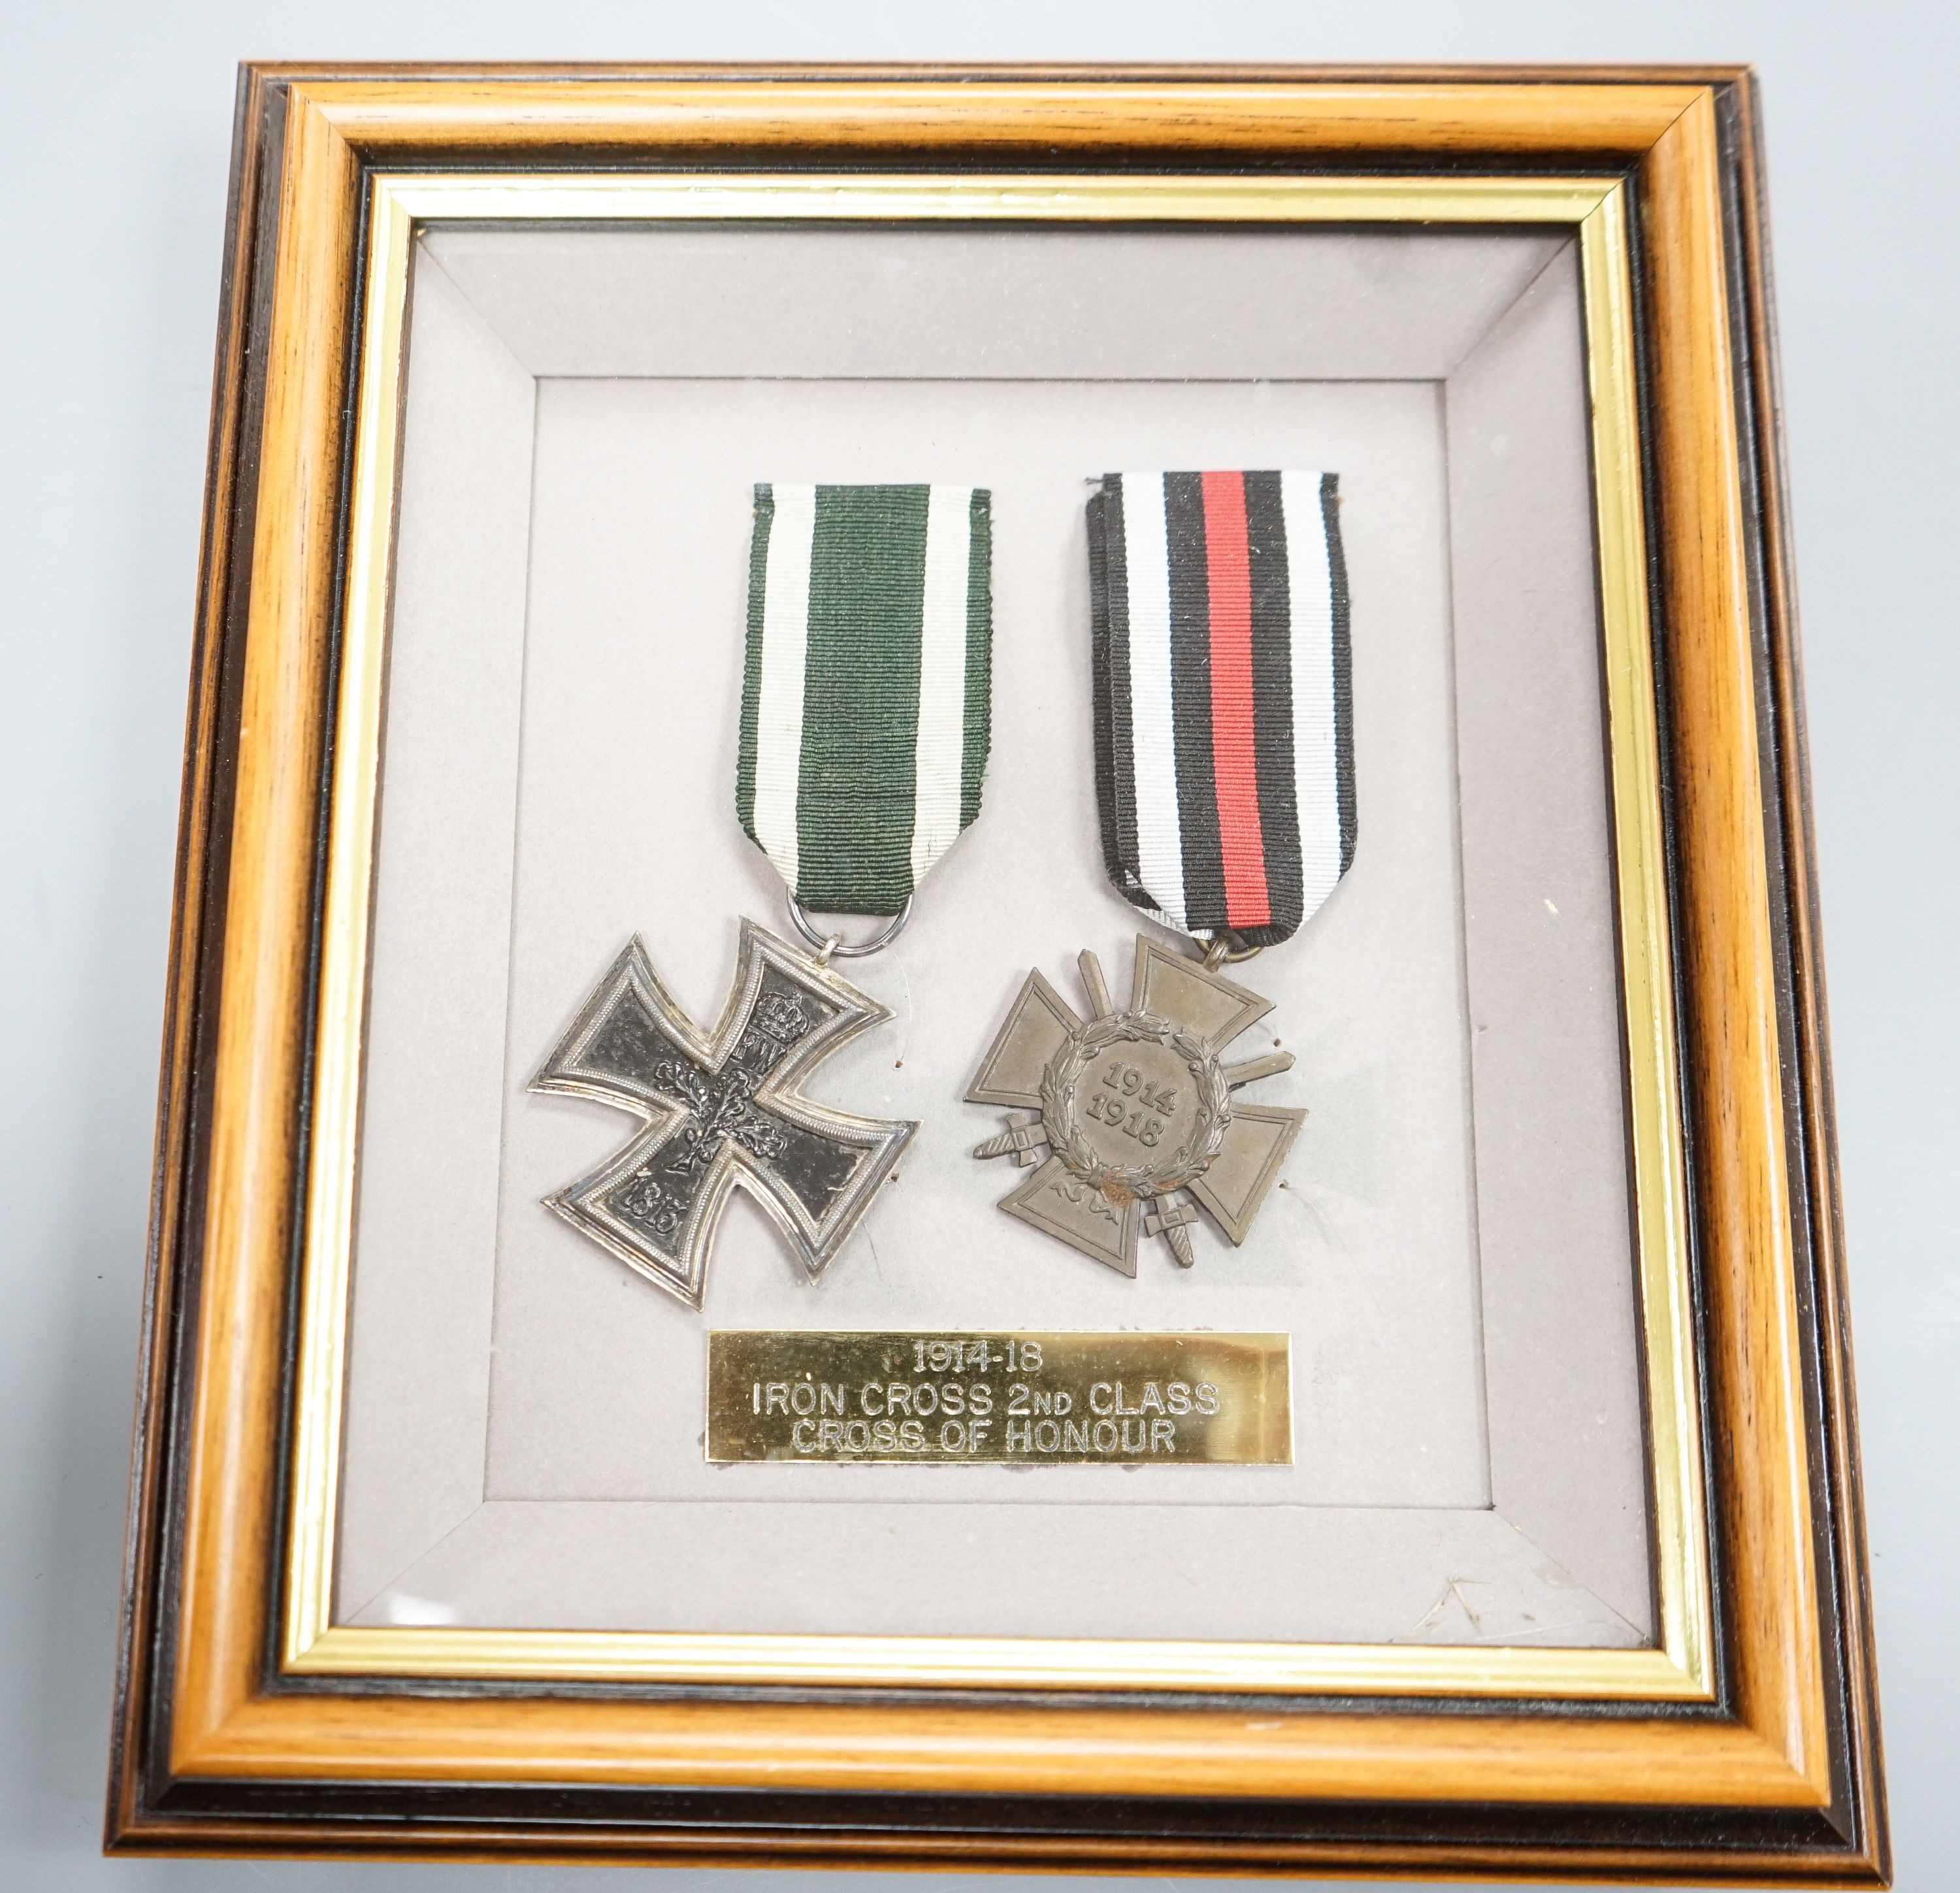 A German WWII Mother's Cross, rare unfinished, framed WWI Iron Cross and Cross of Honour and two miniature photographic booklets.